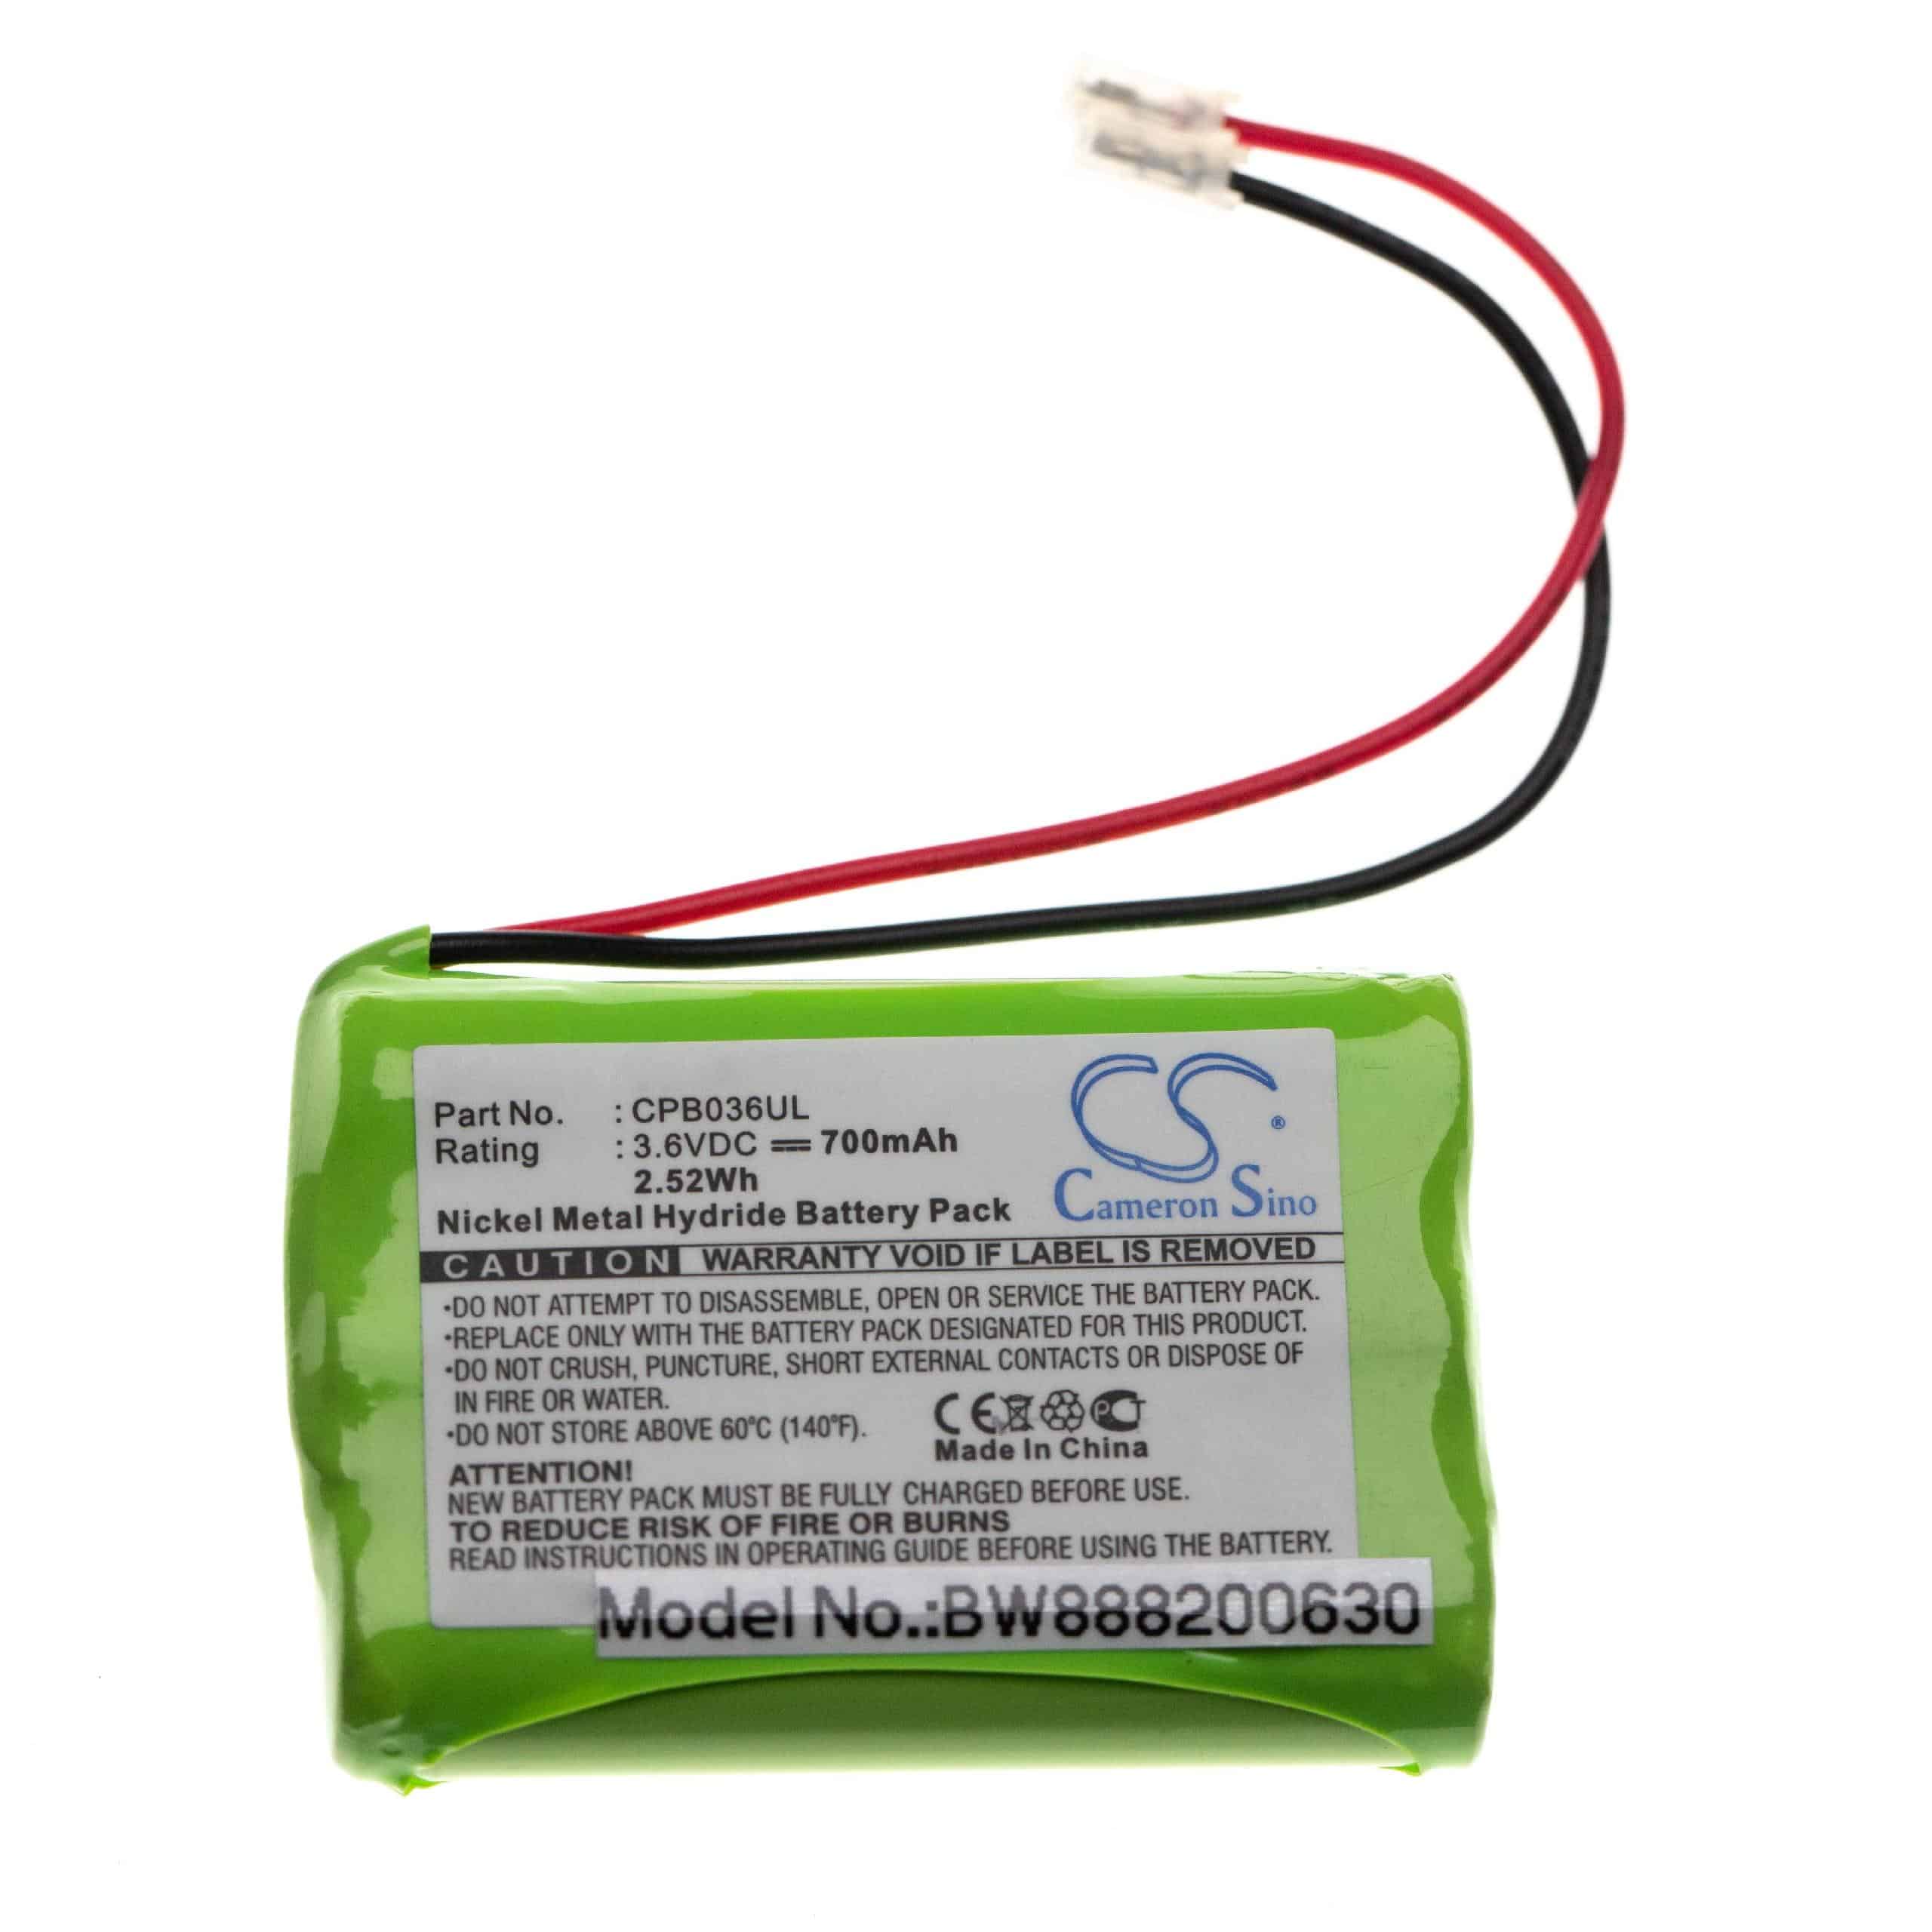 Universal Replacement Battery for various Devices - 700mAh 3.6V NiMH, Type AAA, HR03, Micro